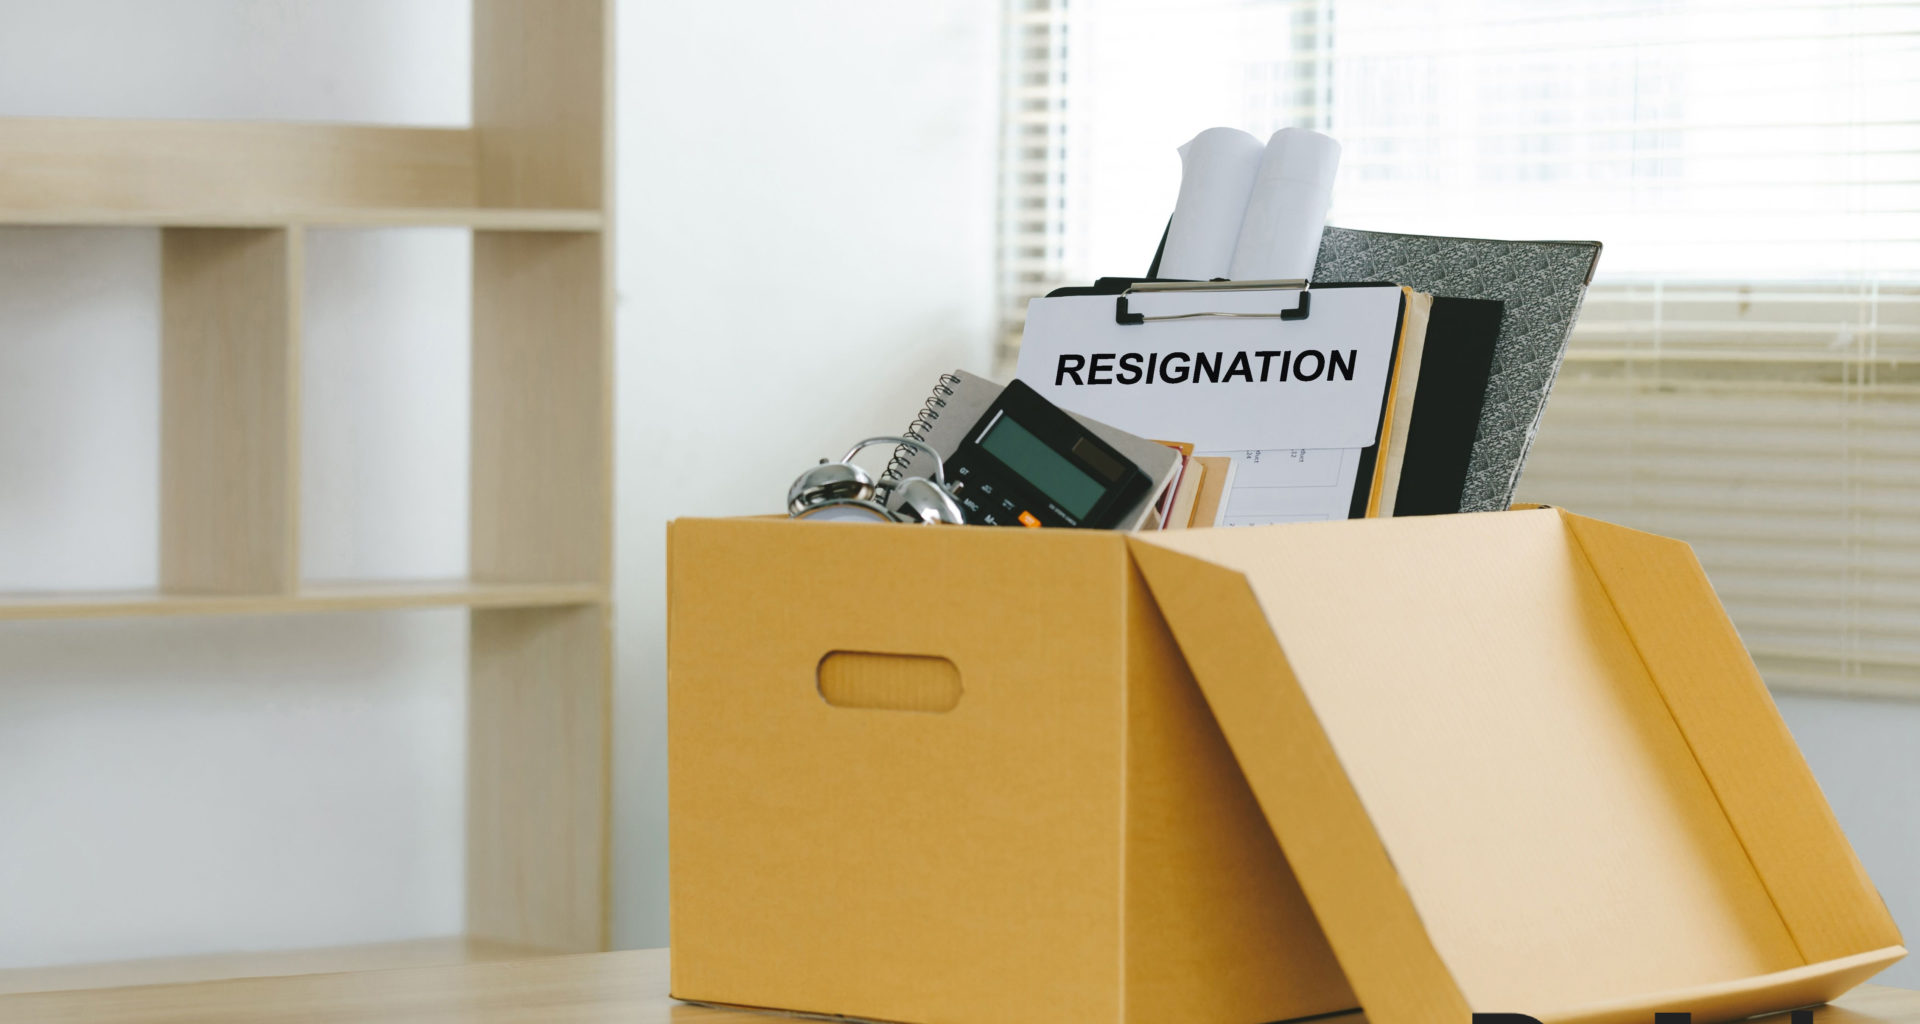 Resignation in UAE Follow These Tips to Ensure a Legal Exit